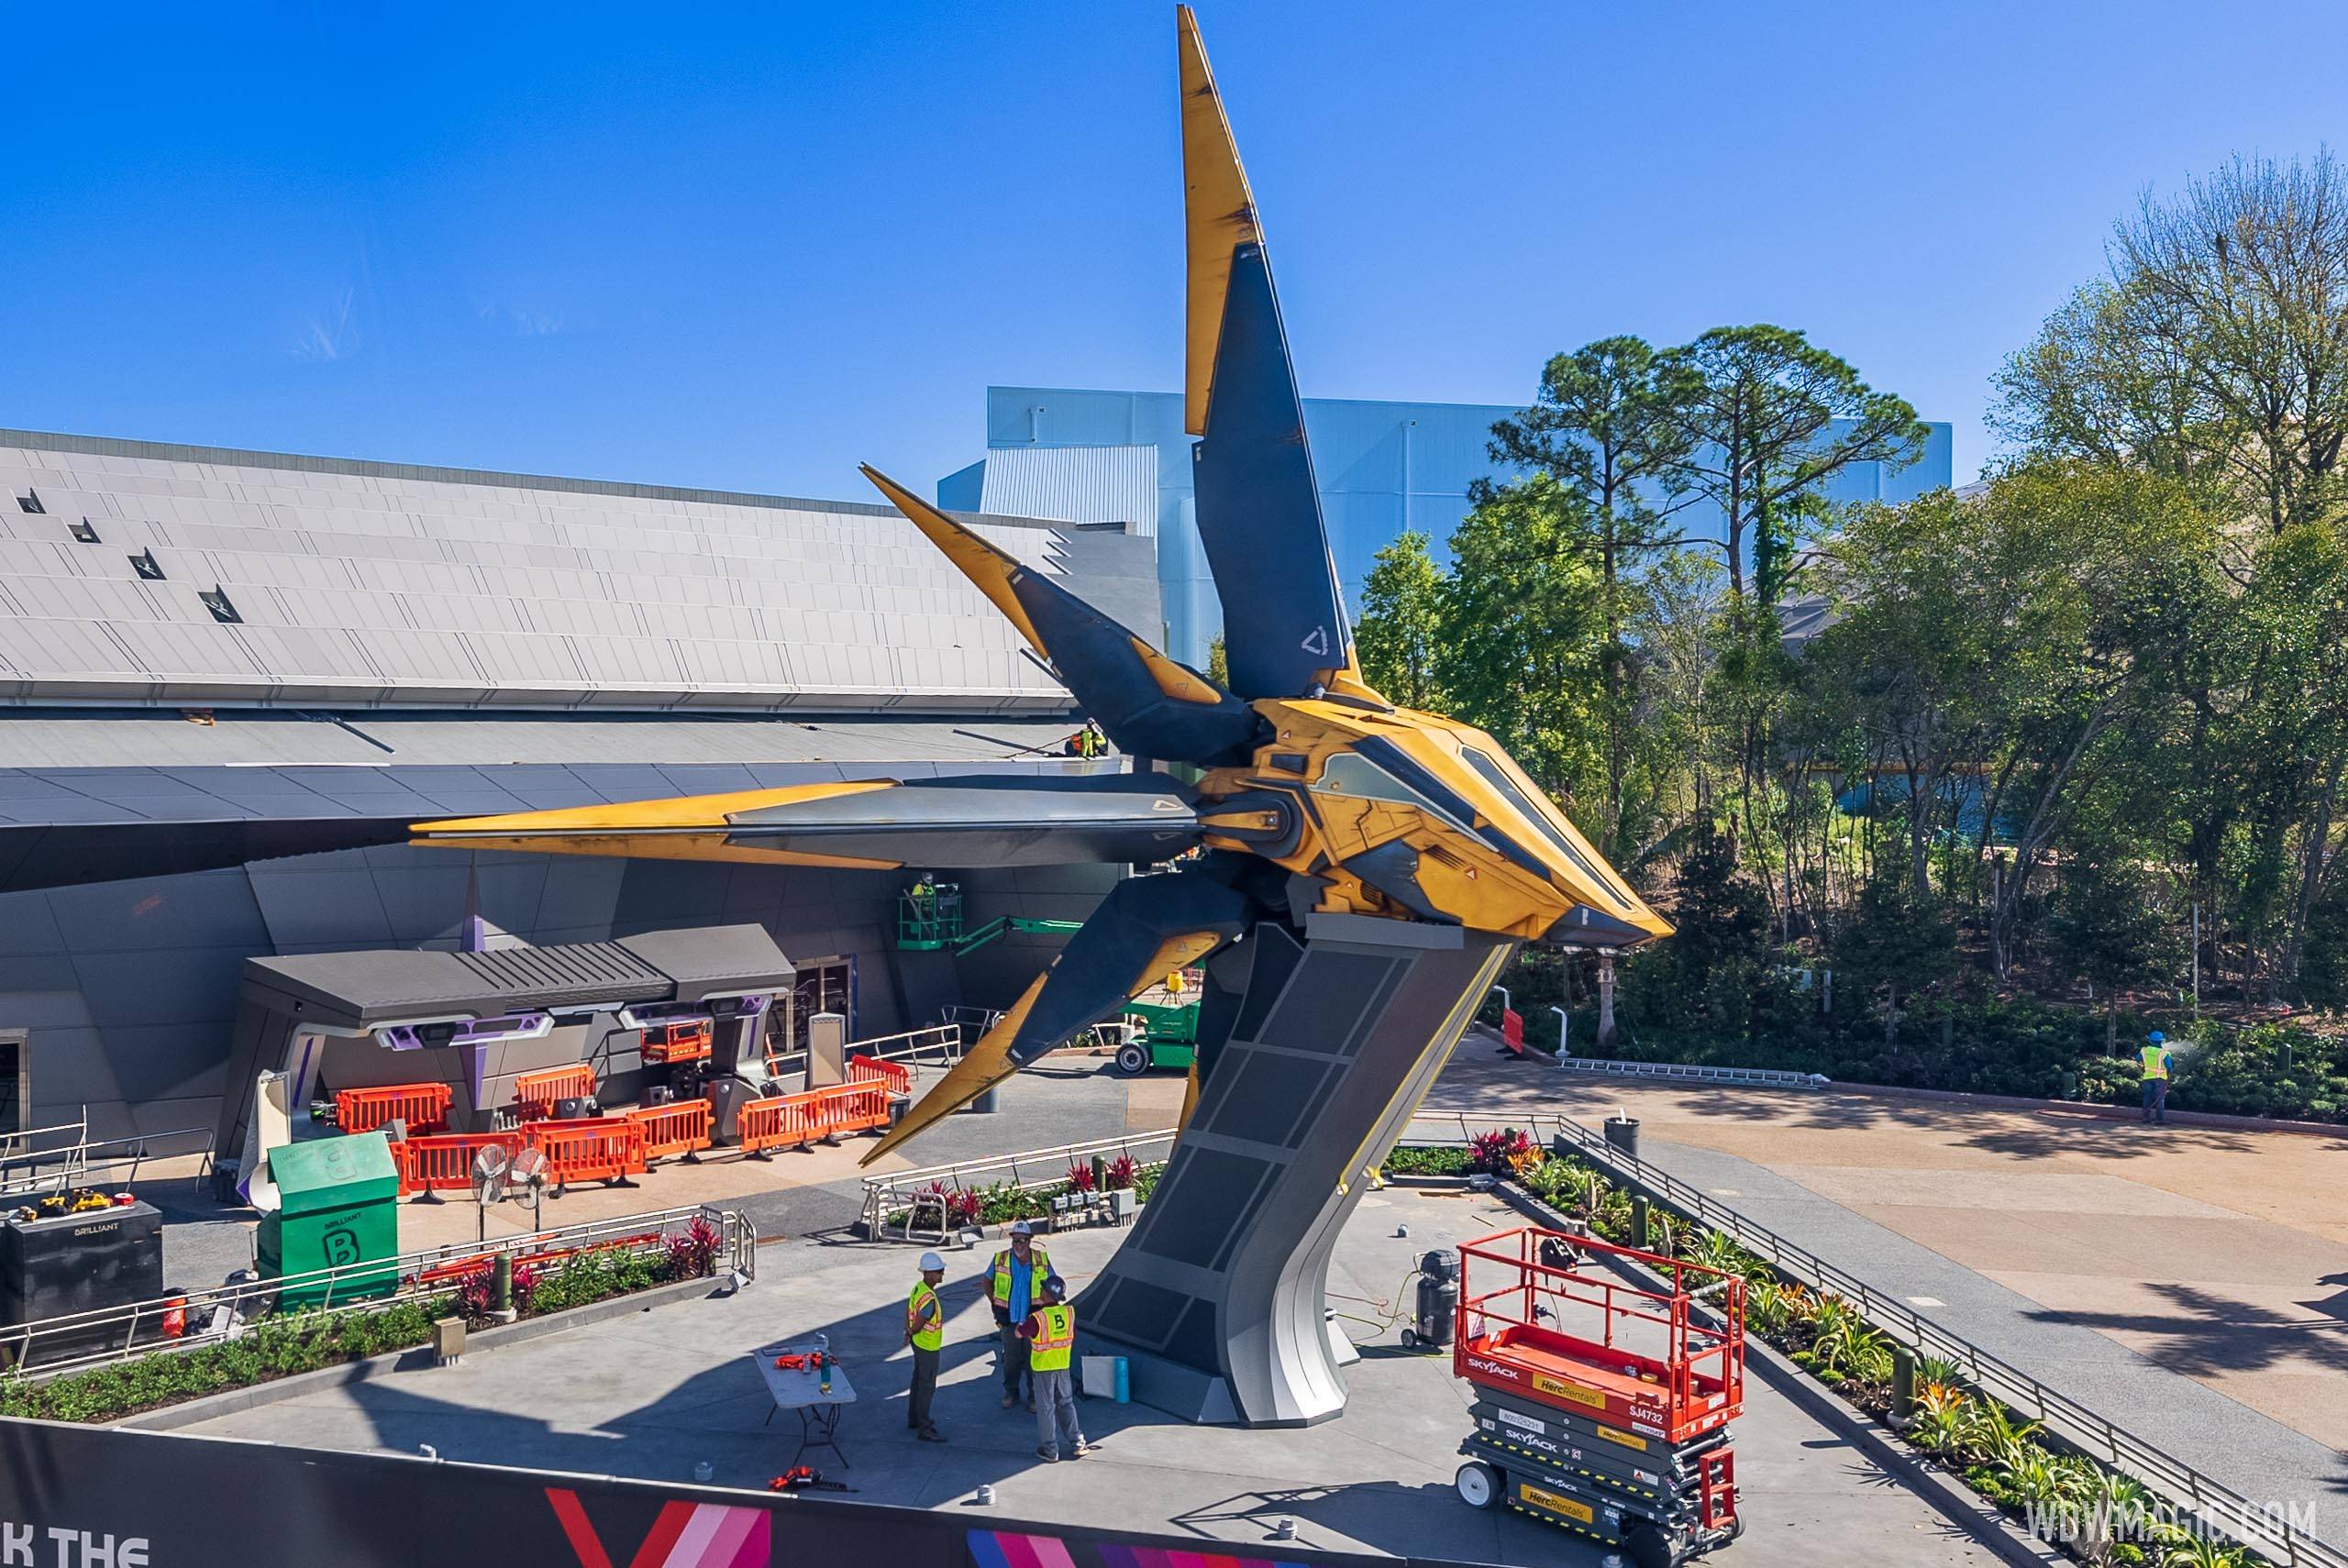 Entrance area at EPCOT's Guardians of the Galaxy Cosmic Rewind looks close to completion as opening nears